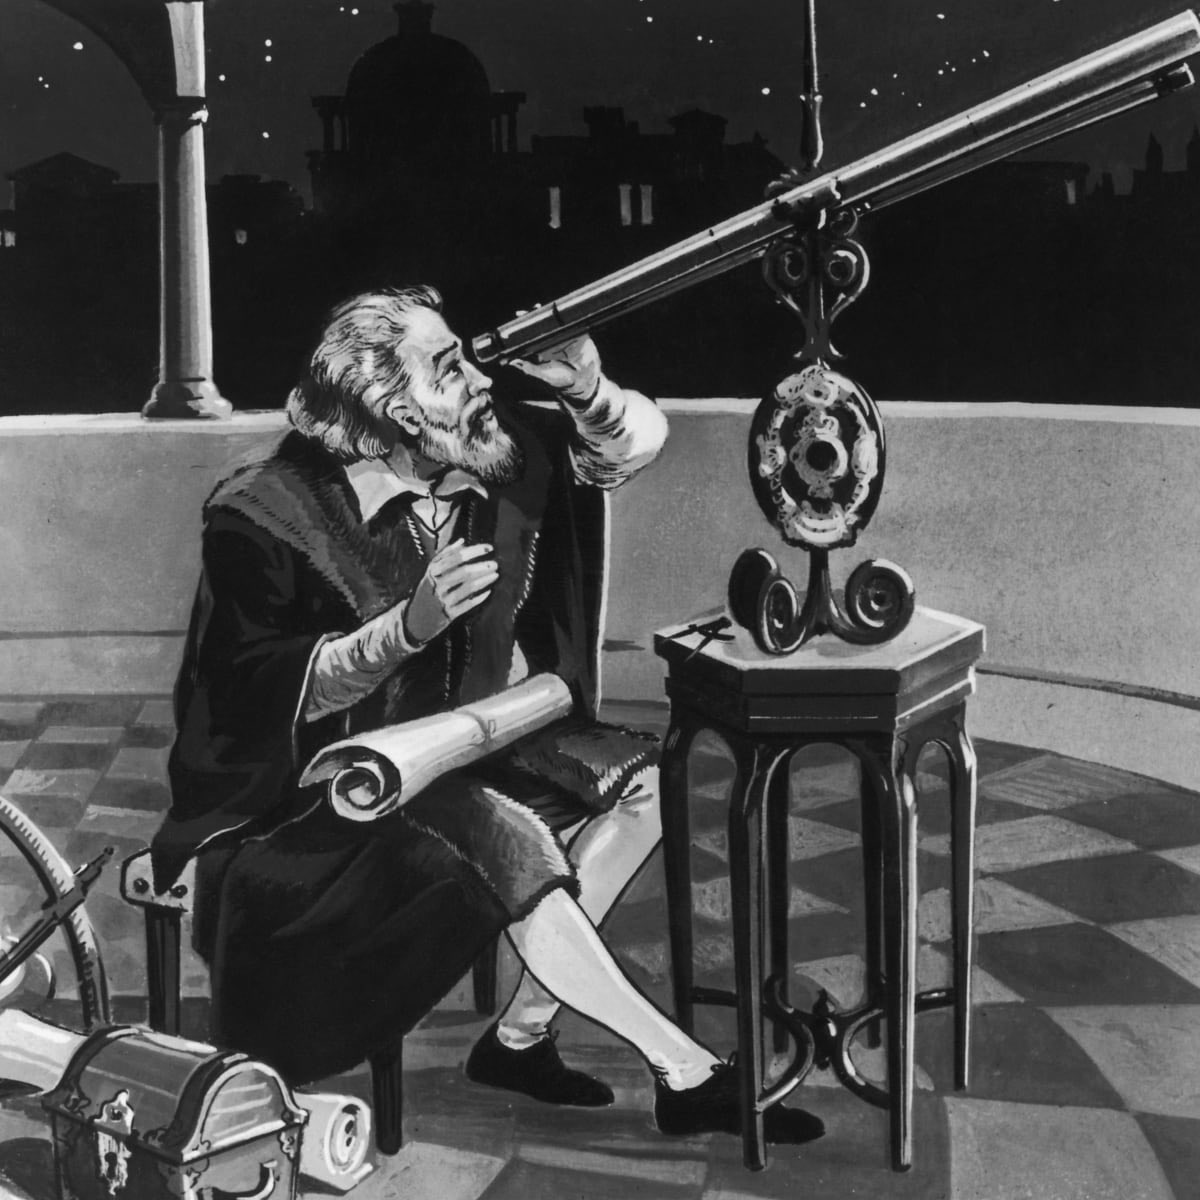 Galileo invented the first astronomical telescope ever! His invention led to discovering many of outer space's objects, such as sunspots, moon mountains, the 4 moons of Jupiter, and Saturn's Rings!